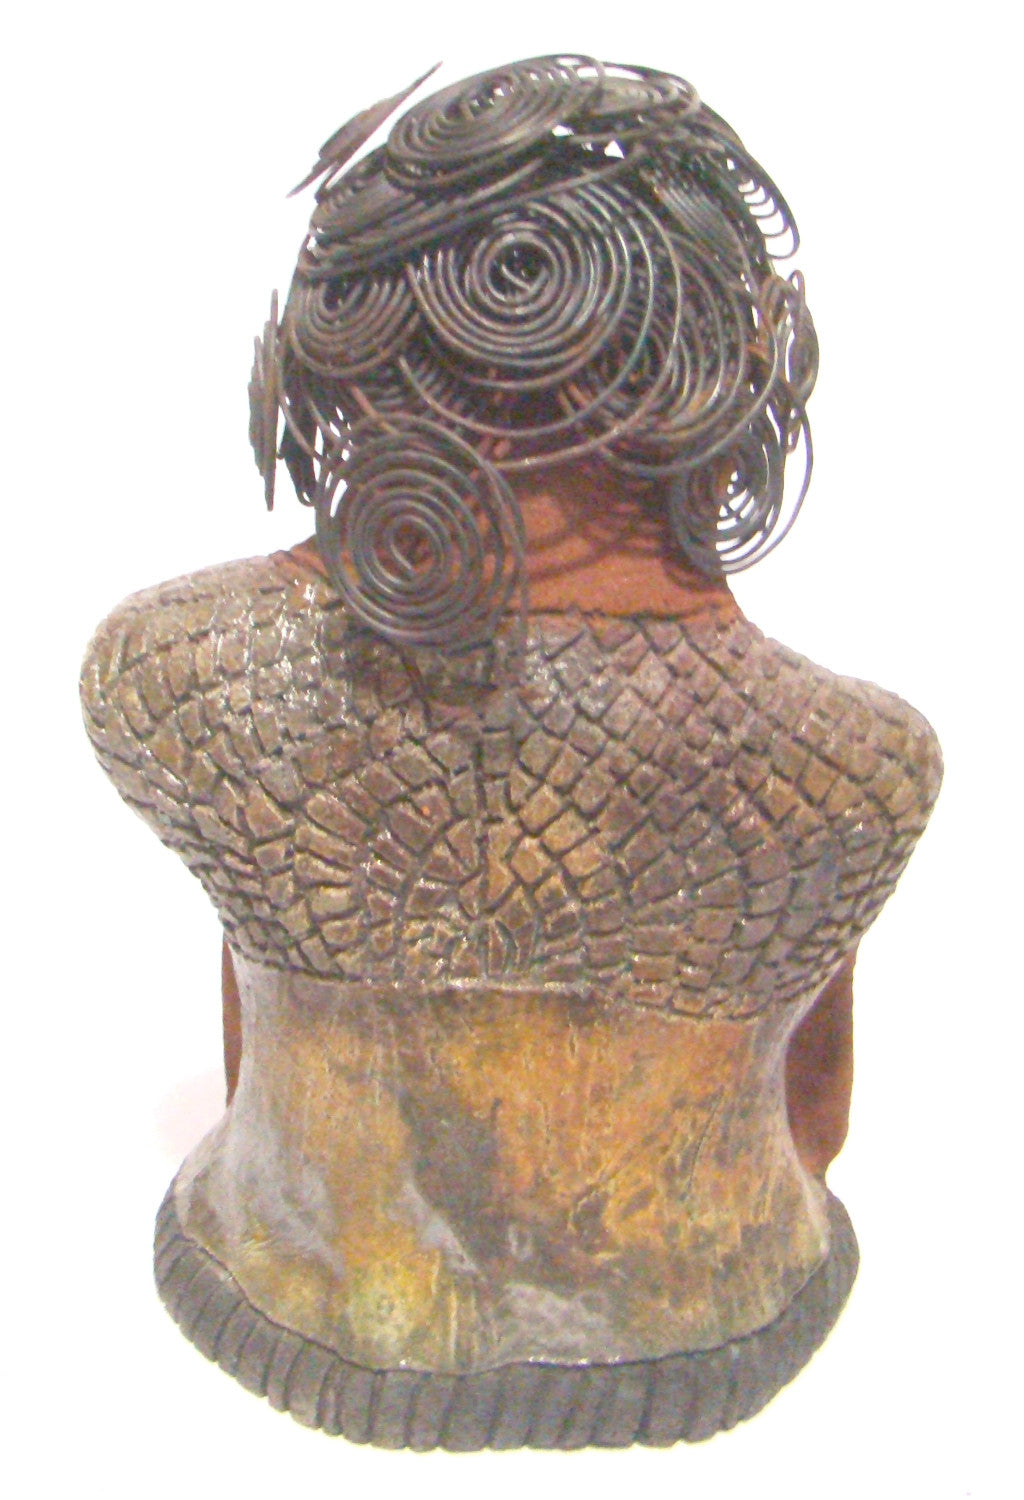 Her black curled wire hair measures over 15 feet.